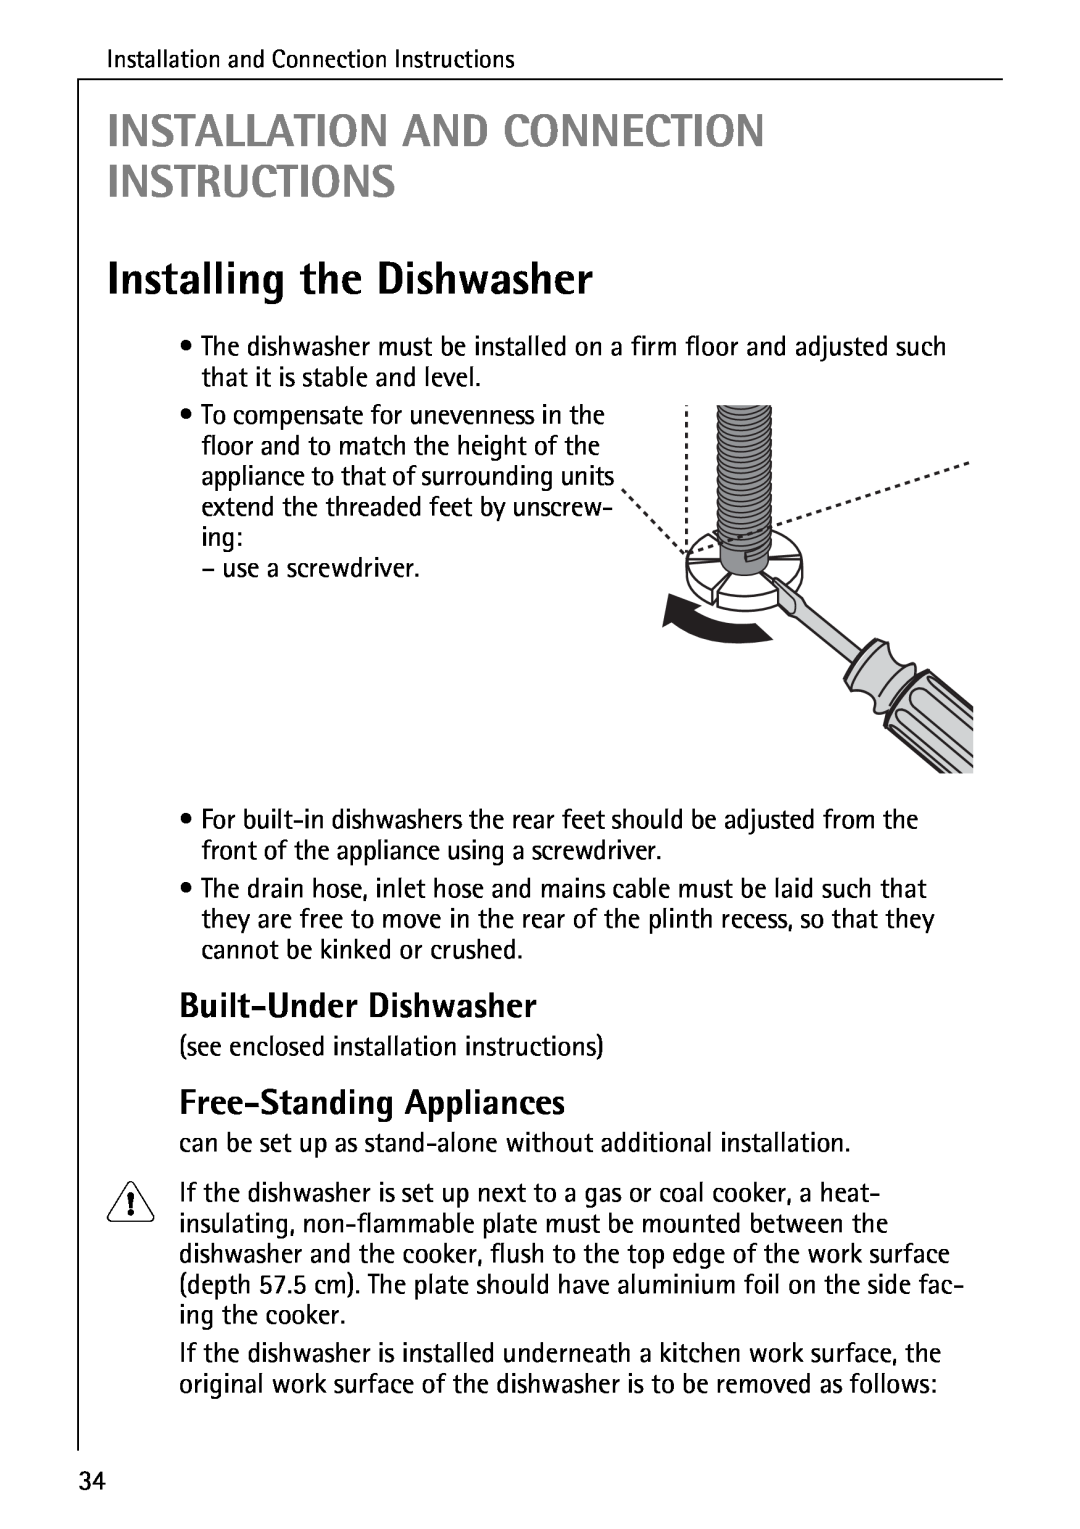 Electrolux 60820 manual Installation And Connection Instructions, Installing the Dishwasher, Built-Under Dishwasher 